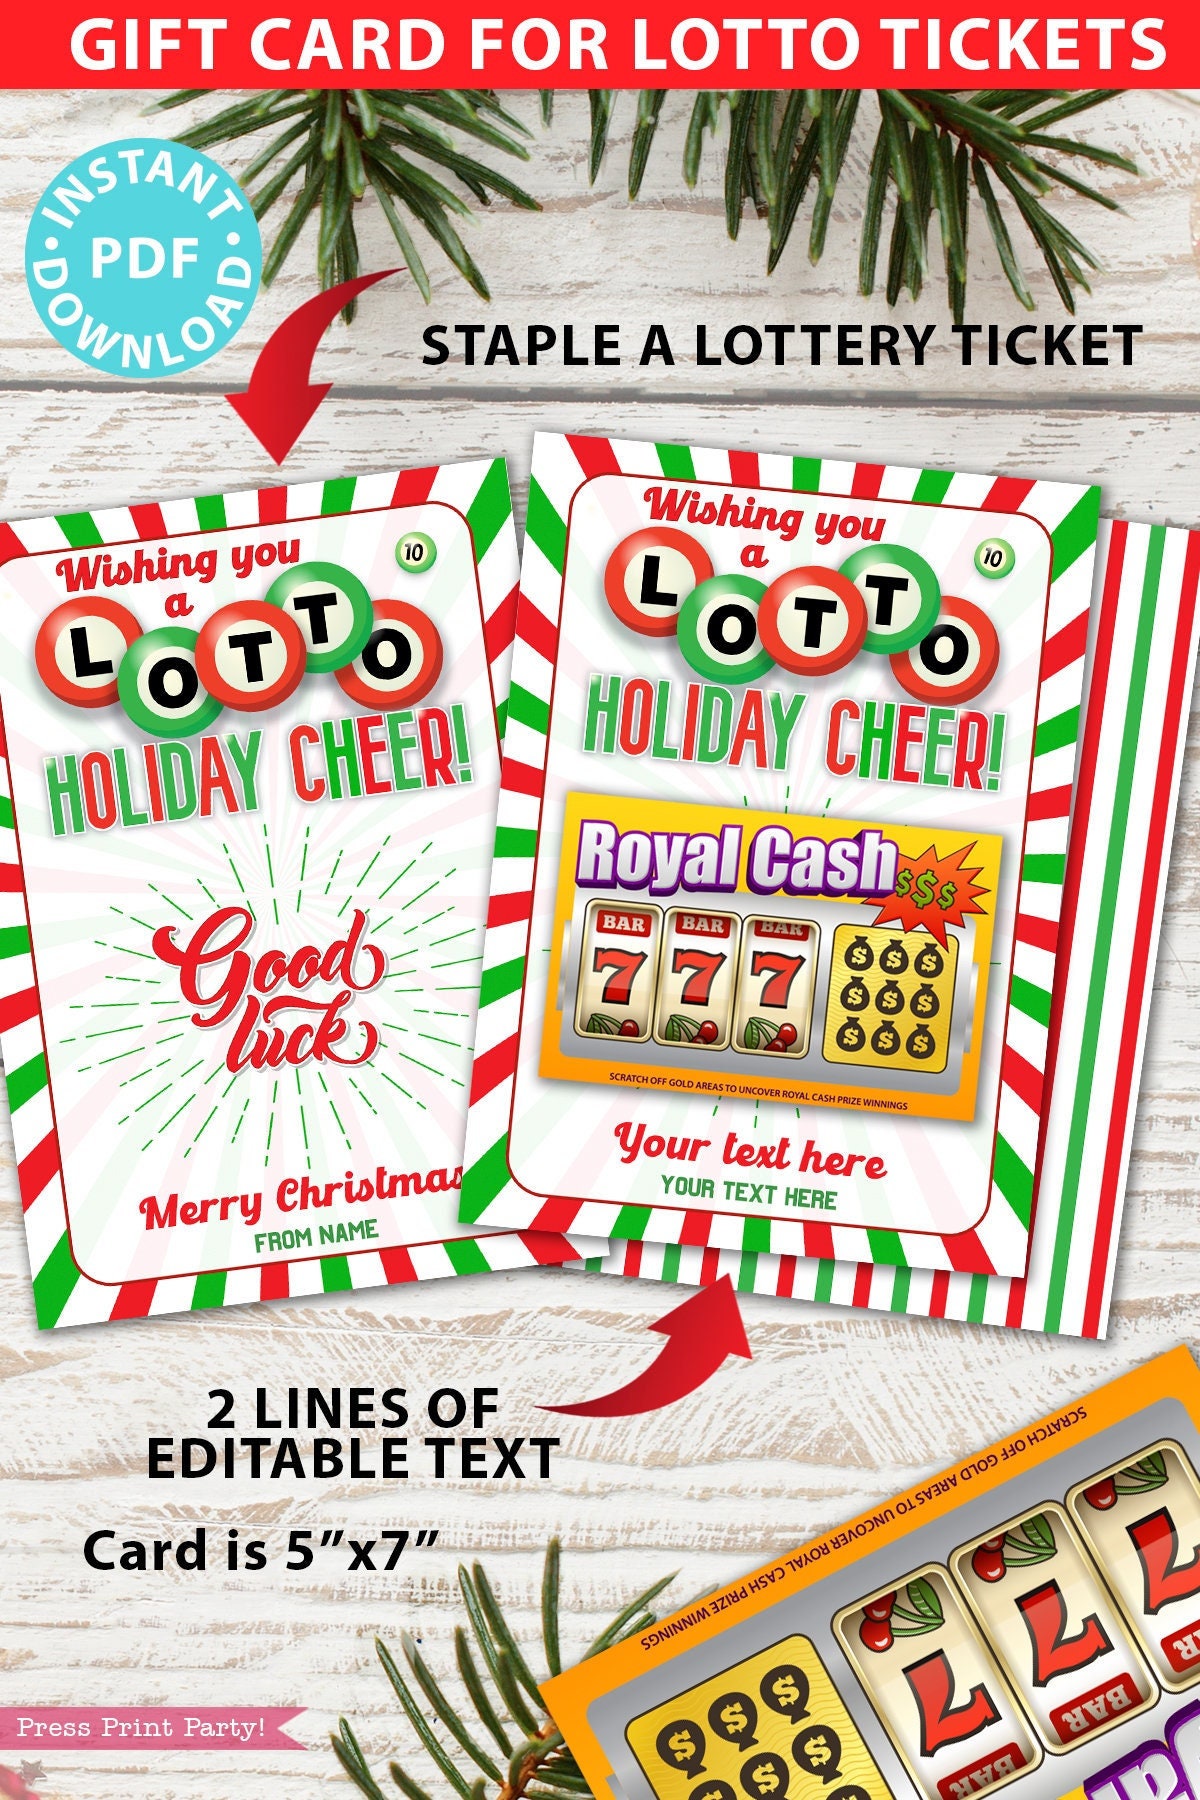 CALIFORNIA LOTTERY SCRATCHERS Lotto TICKET HOLDER SLEEVE 2015 Holiday Card  GIFT